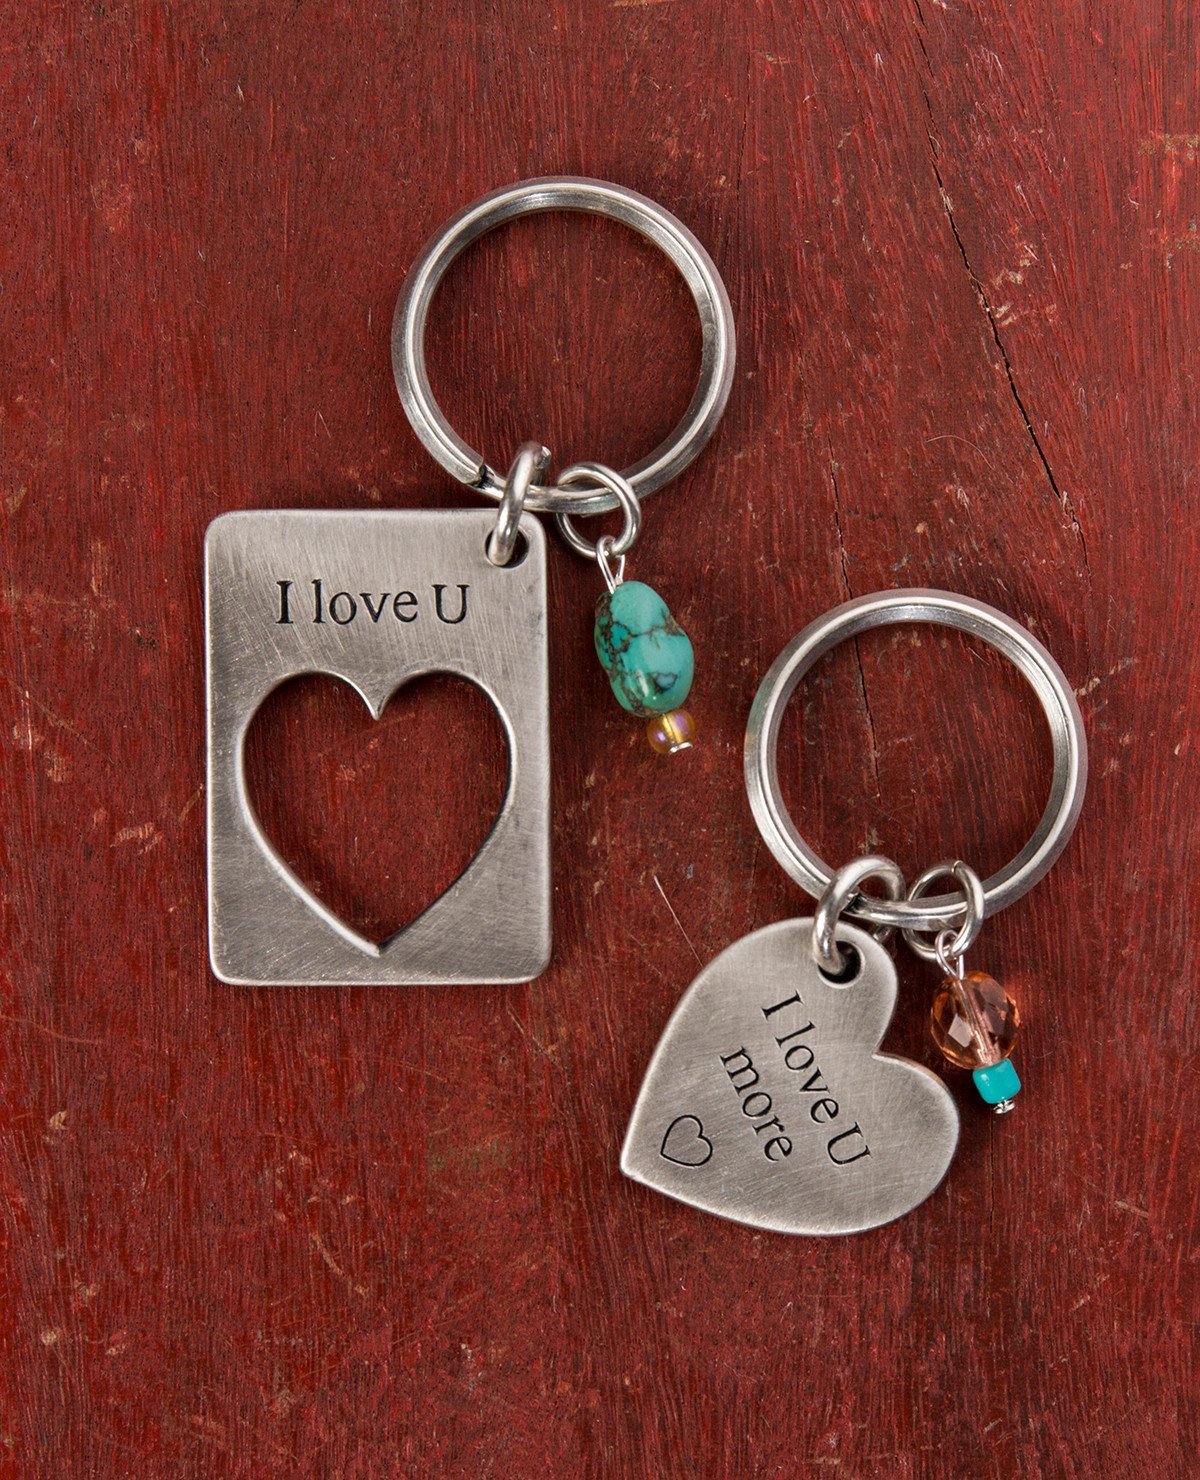 A visually remarkable and extremely romantic pair of keychains.
One is designed as a rectangle with a missing piece in the shape of a heart with the words "I Love U" written on top.
The other keychain is designed in the shape of a heart and has the words "I Love You More" written on it, perfectly completing the piece on the other keychain.
Each one of the keychains is decorated by two colorful beads.
The keychains are coated in sterling silver and are strong and reliable. 
A perfect and romantic gift for an